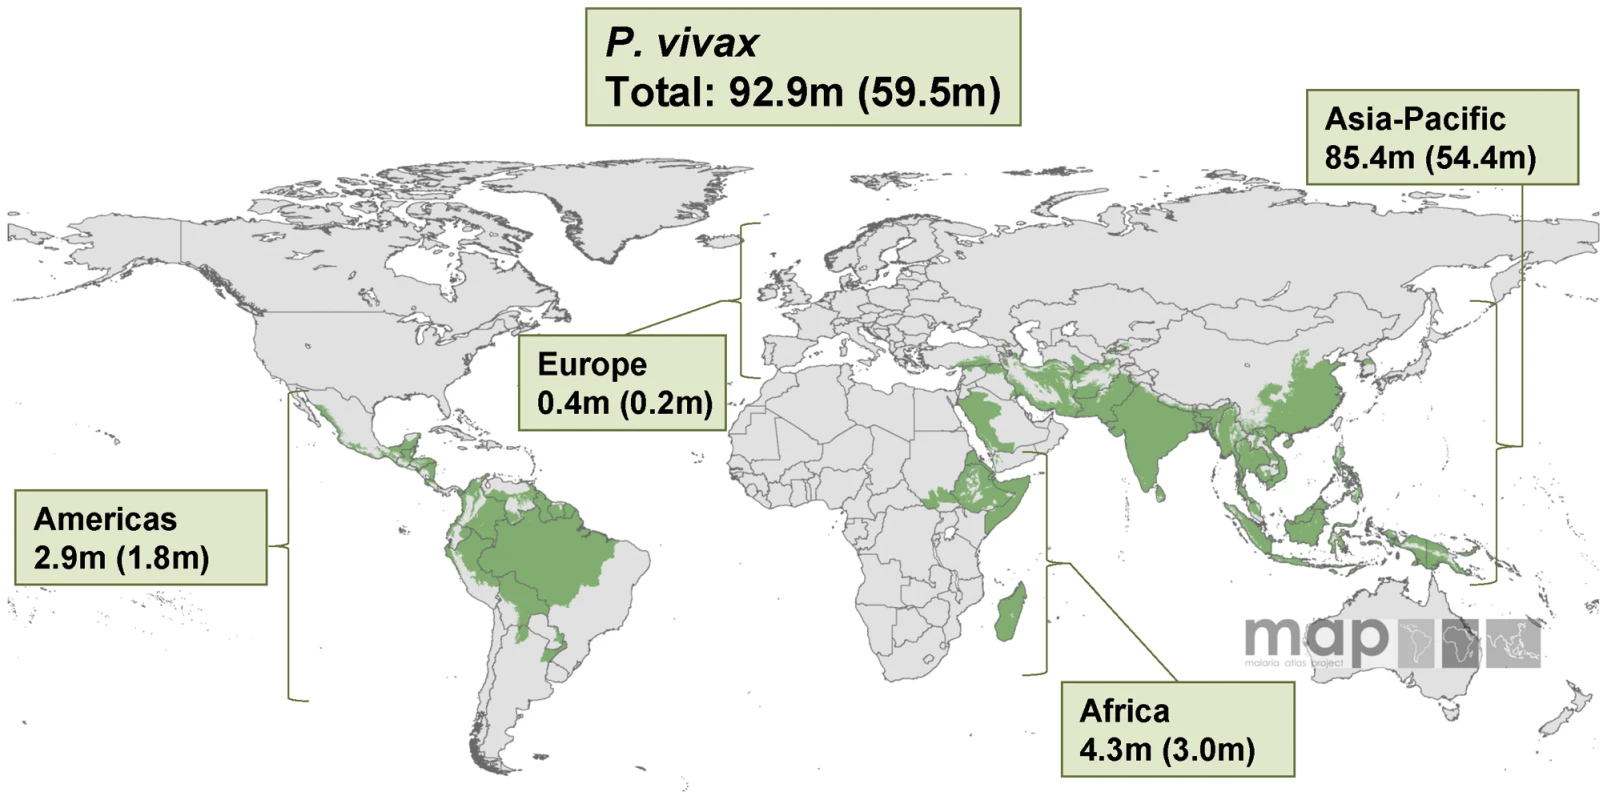 Malaria risk map for &lt;i&gt;P. vivax&lt;/i&gt; and corresponding number of pregnancies in each continent in 2007.